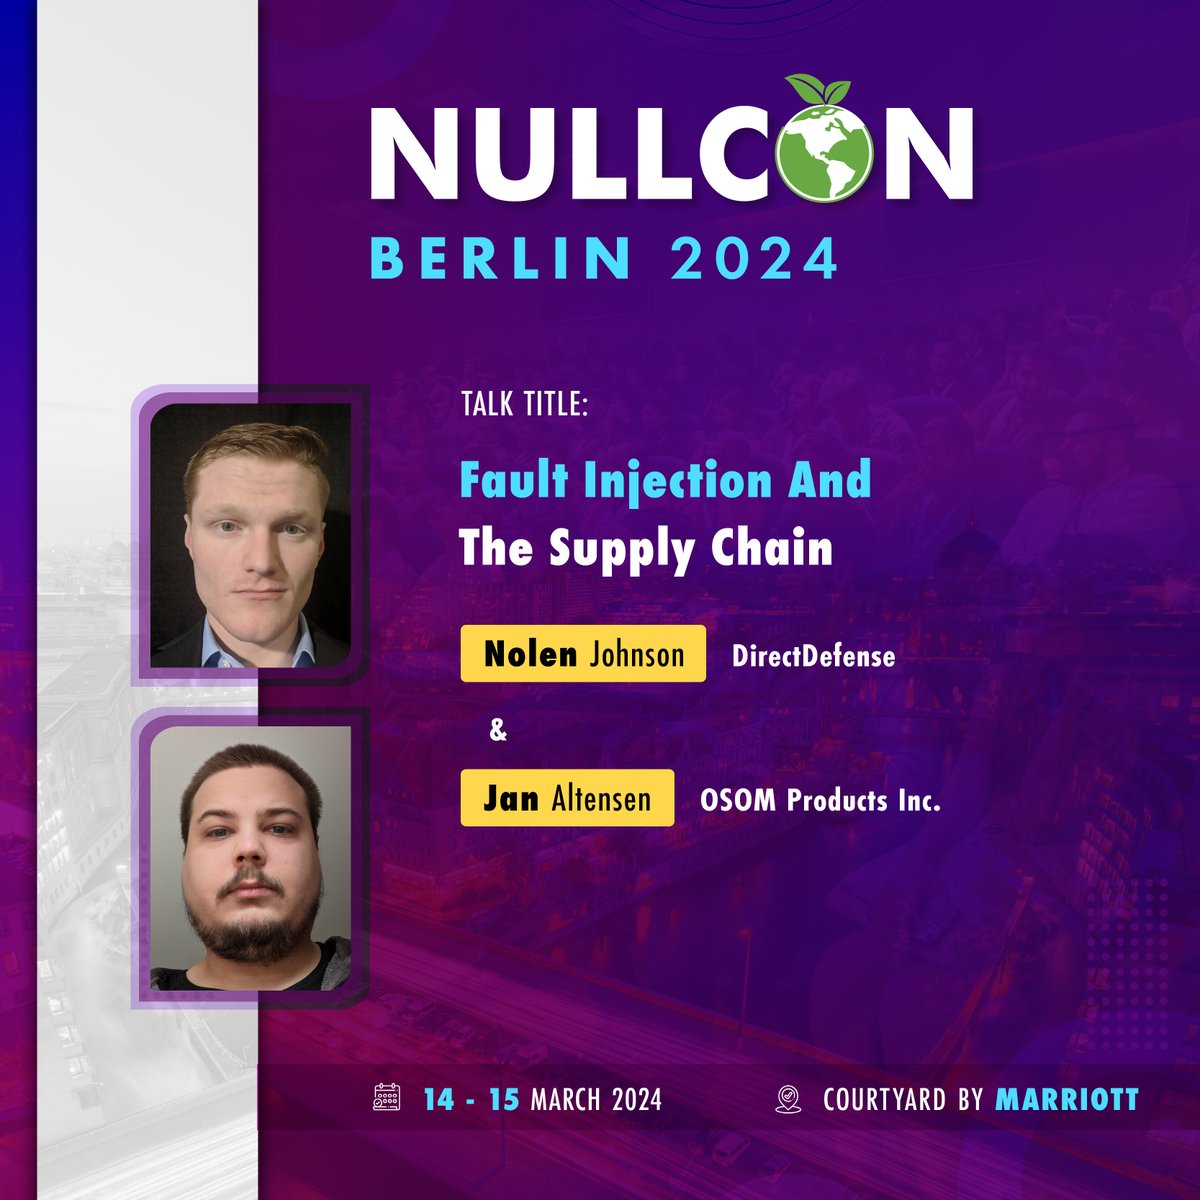 Jan Altensen and I will be speaking next week at #NullConBerlin2024!

We'll be discussing Fault Injection as a threat vector, its most common uses, and its relevance to the global supply chain as well as your business!

#faultinjection #suppychain #conference